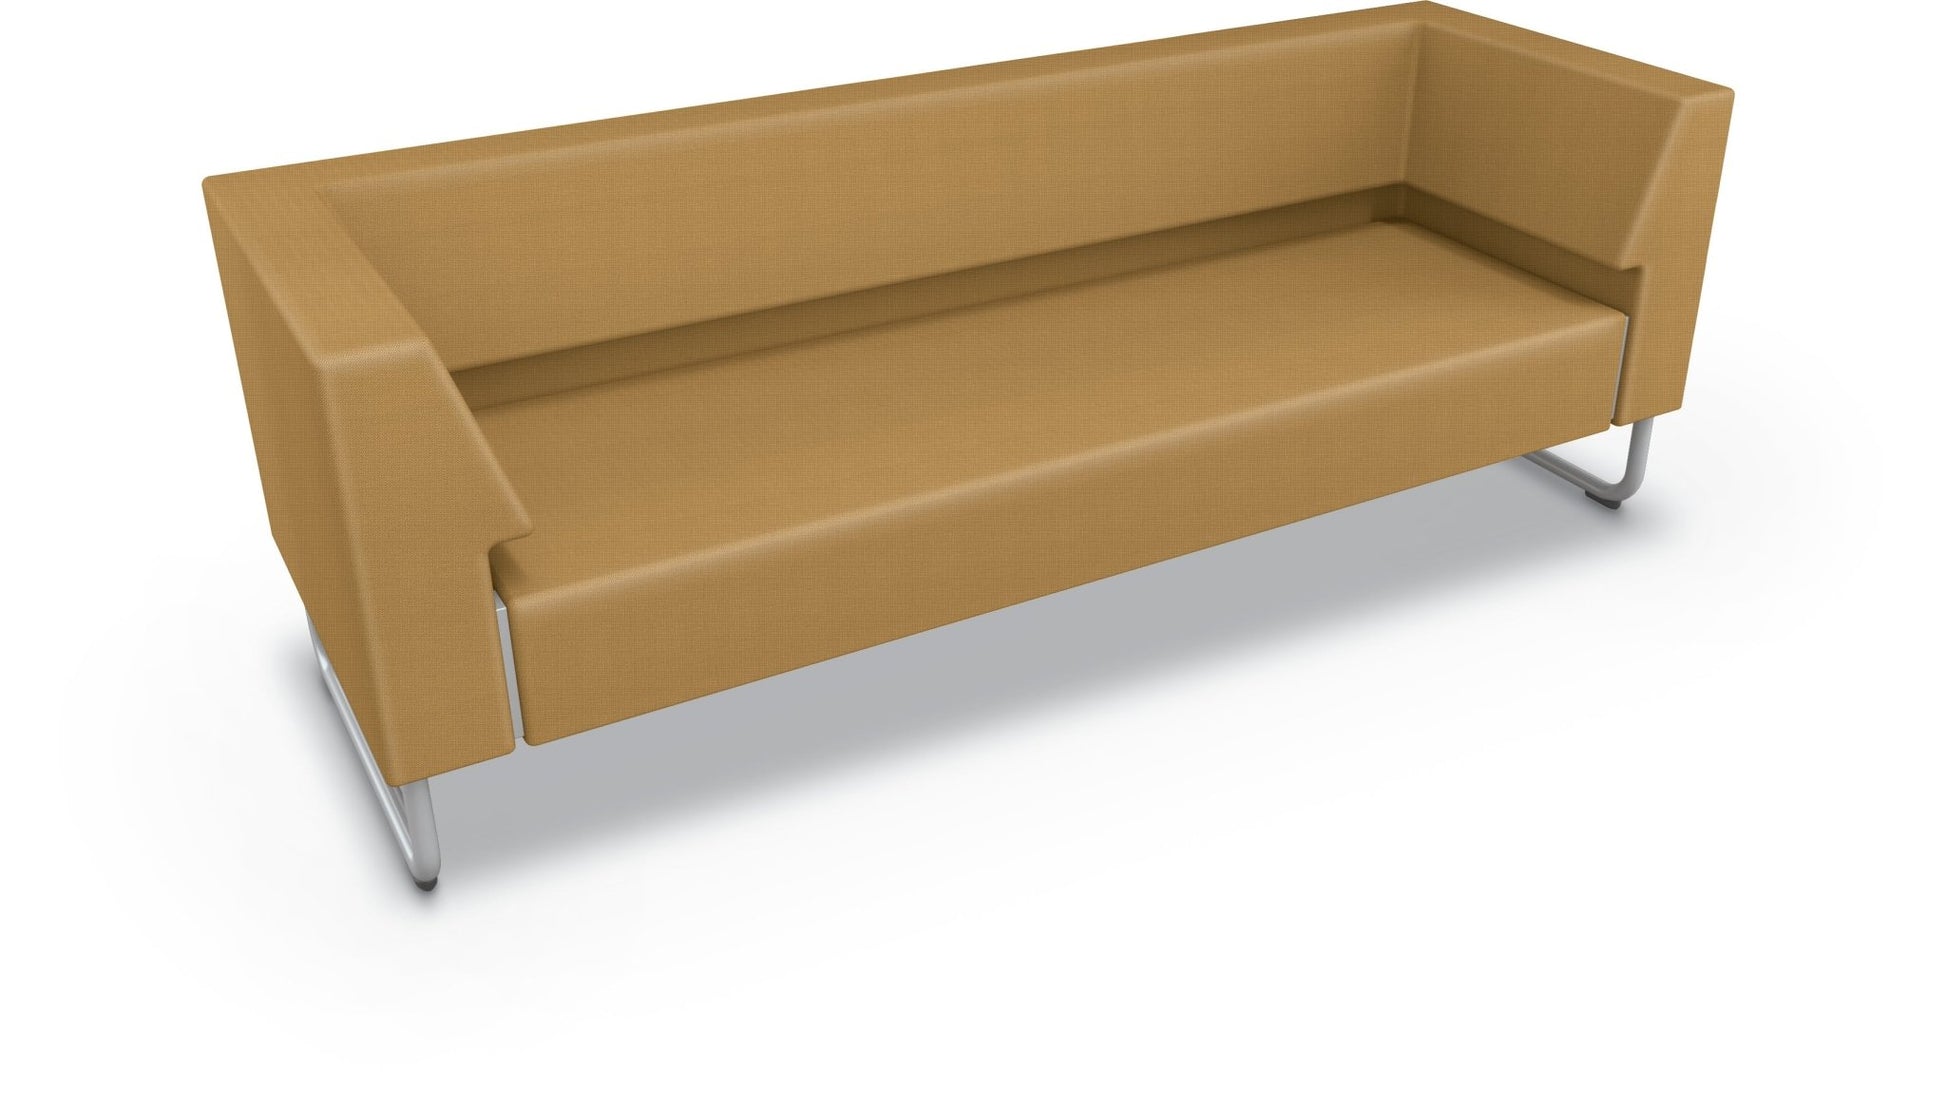 Mooreco Akt Soft Seating Lounge Sofa - Both Arms - Grade 02 Fabric and Powder Coated Sled Legs - SchoolOutlet